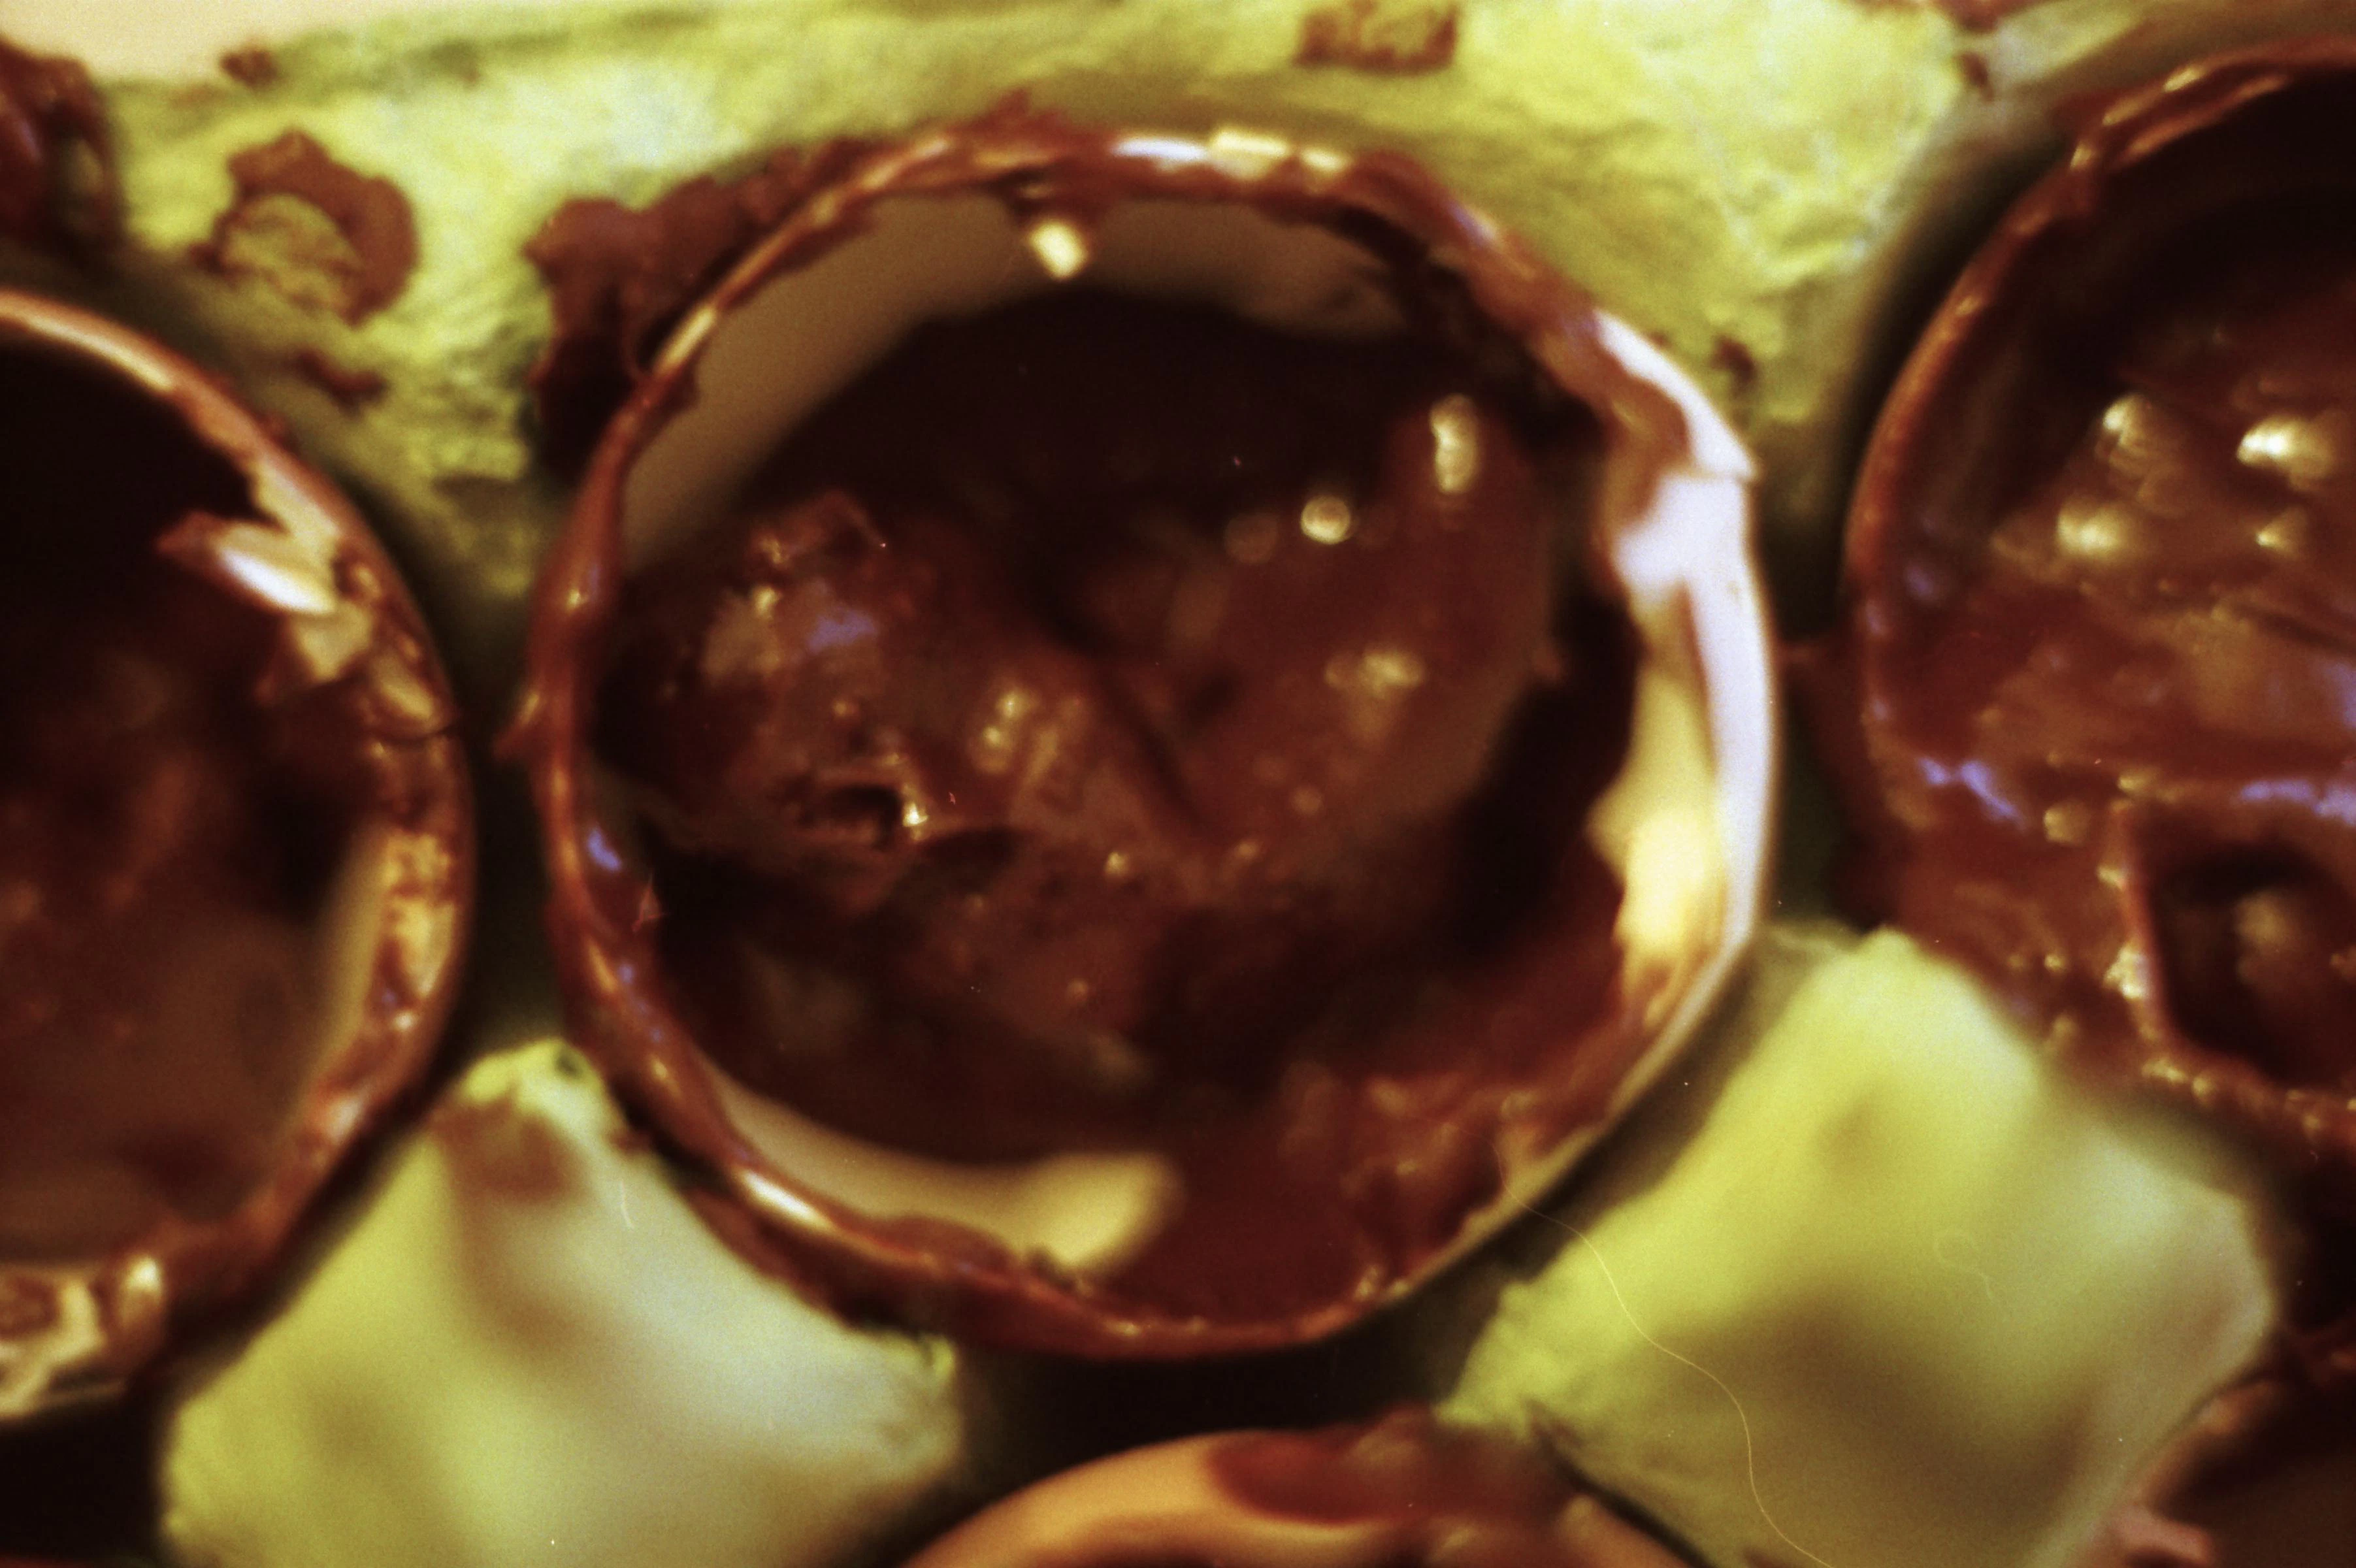 Dead born embryos covered in chocolate